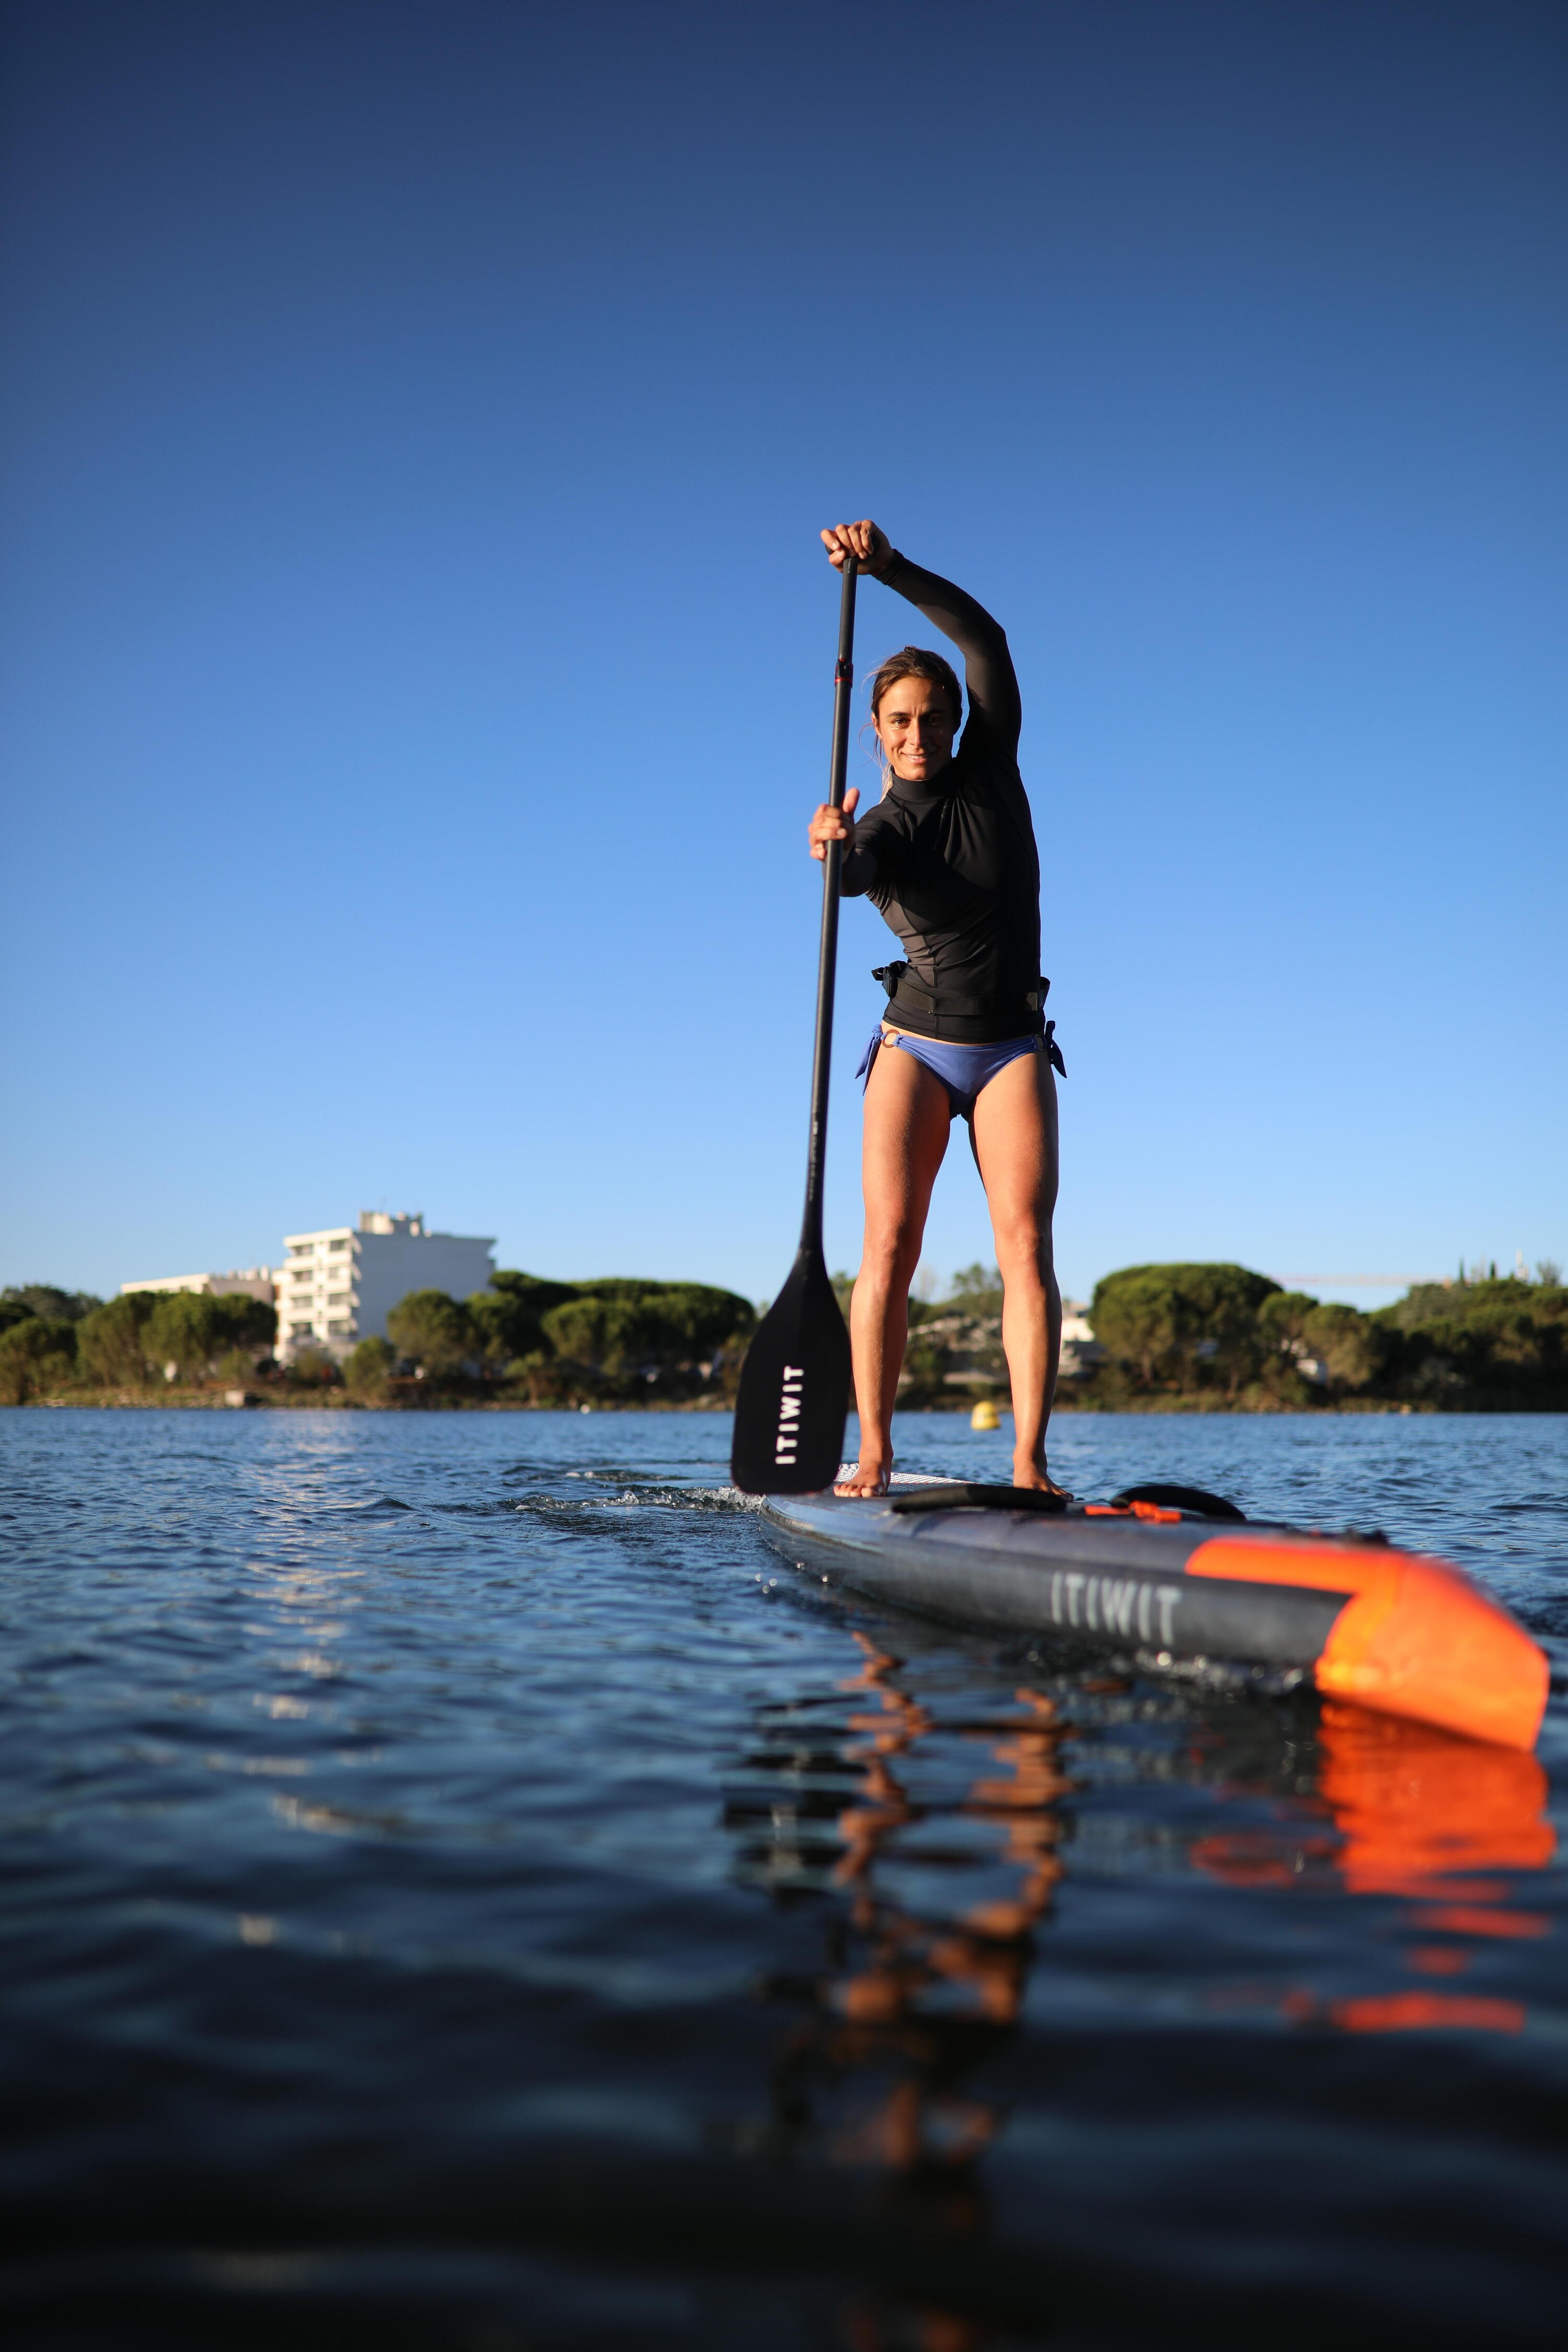 R500 12FT 6" / 26" RACING INFLATABLE STAND-UP PADDLEBOARD 2/30